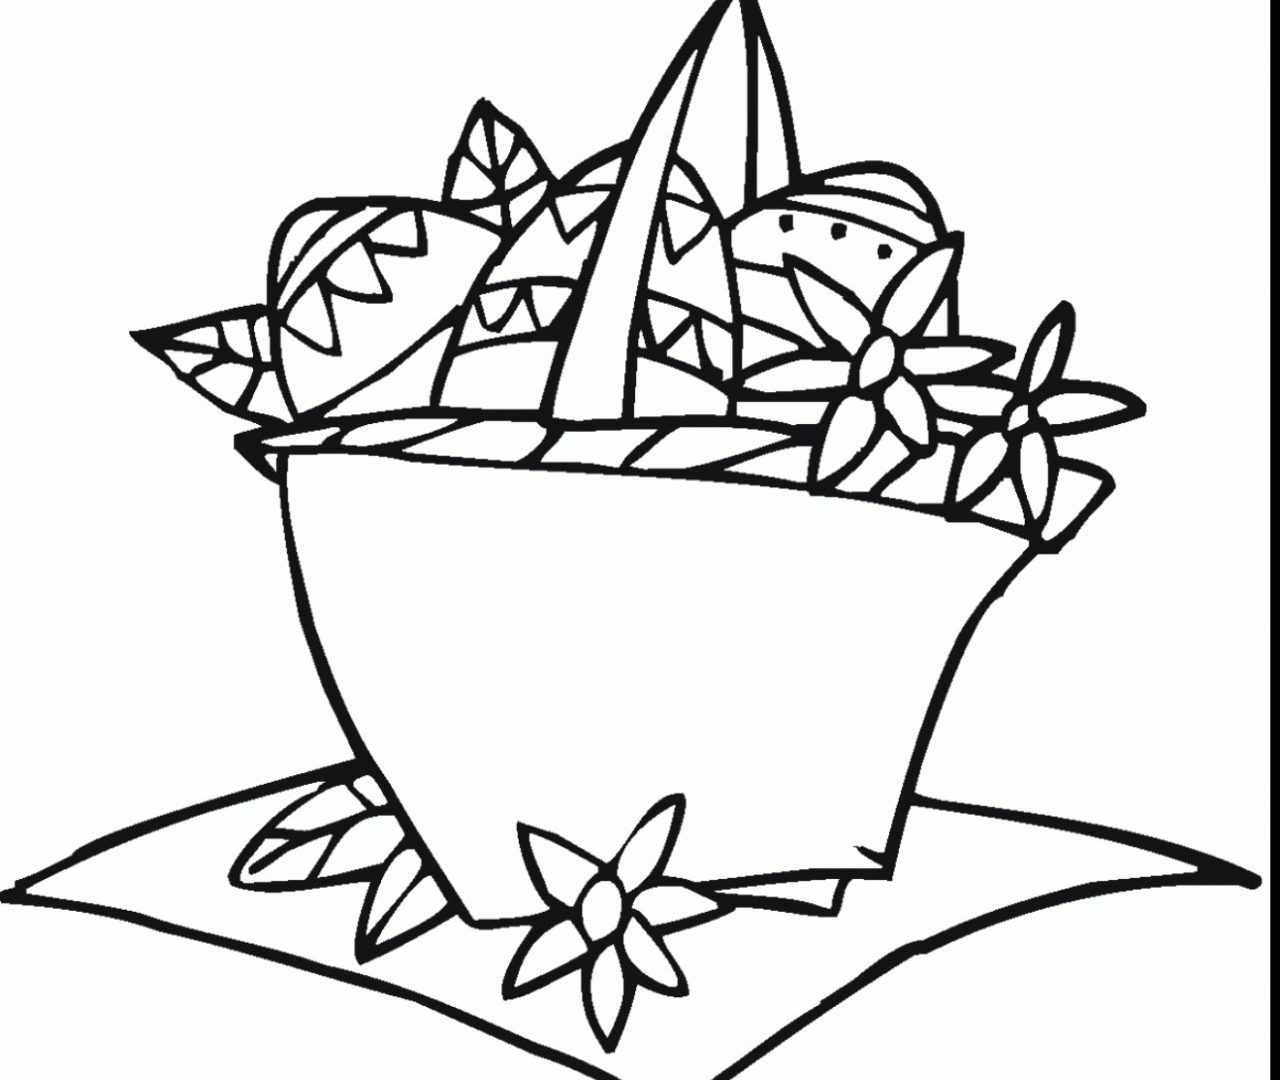 Create Your Own Coloring Page Free / Create Name Coloring Pages at